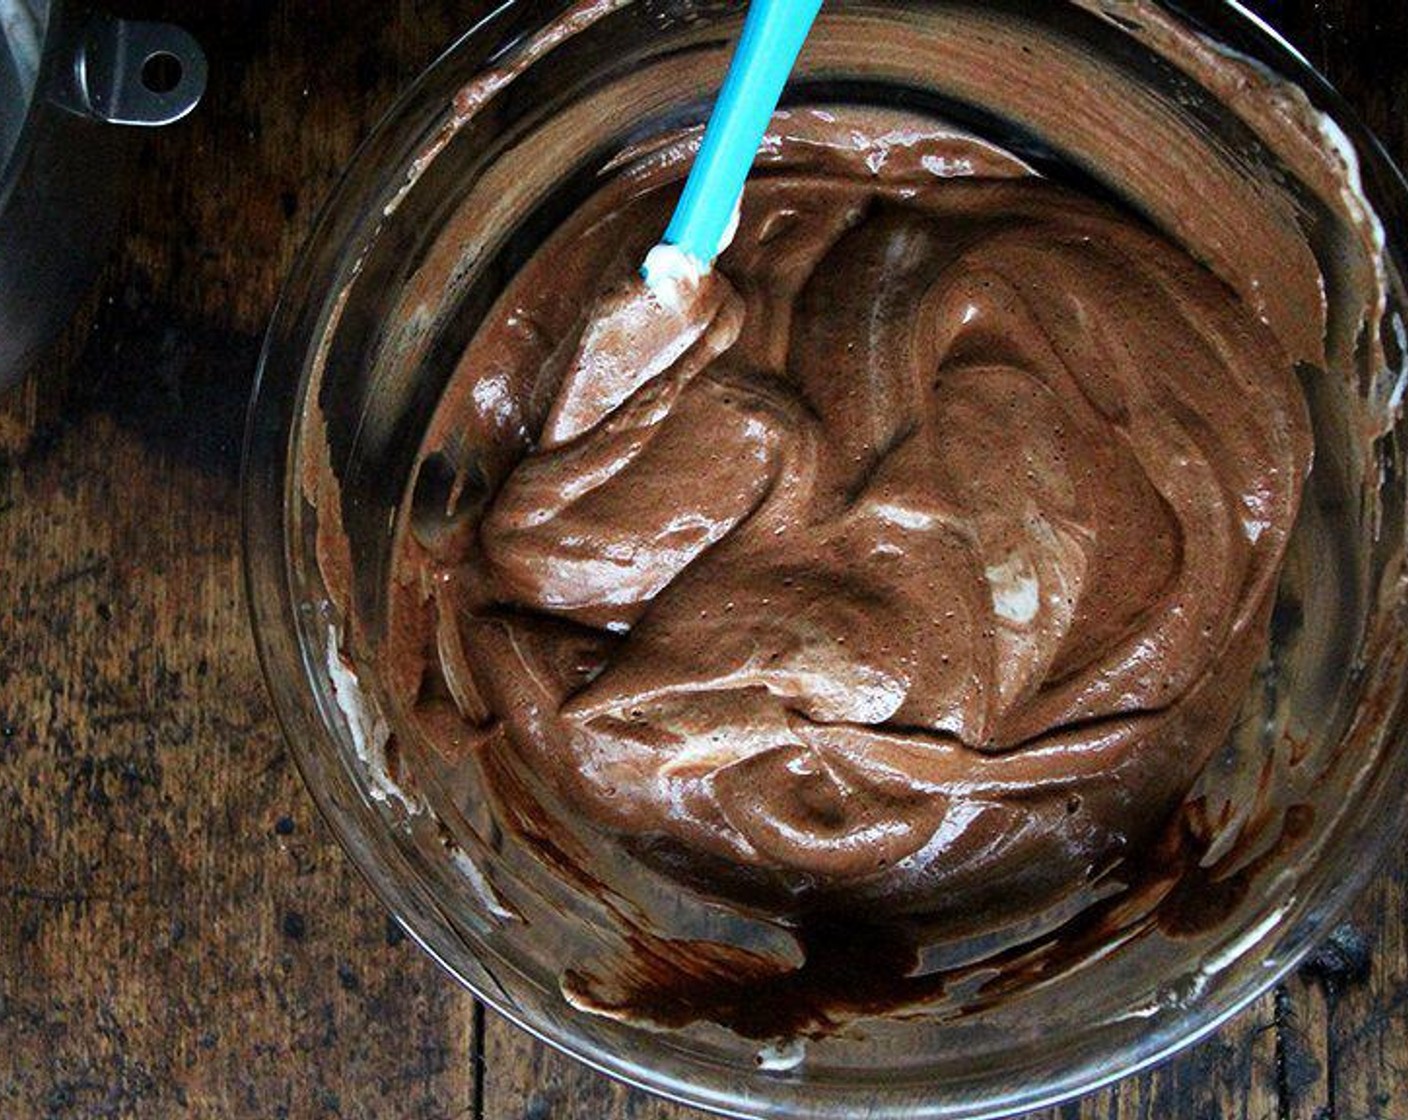 step 2 Meanwhile, melt the 70% Dark Chocolate (1 cup) and Almond Milk (1/3 cup) in a double boiler or in the microwave at 30-second intervals until the chocolate is all melted. Stir to combine the mixture, then transfer it to a large mixing bowl.